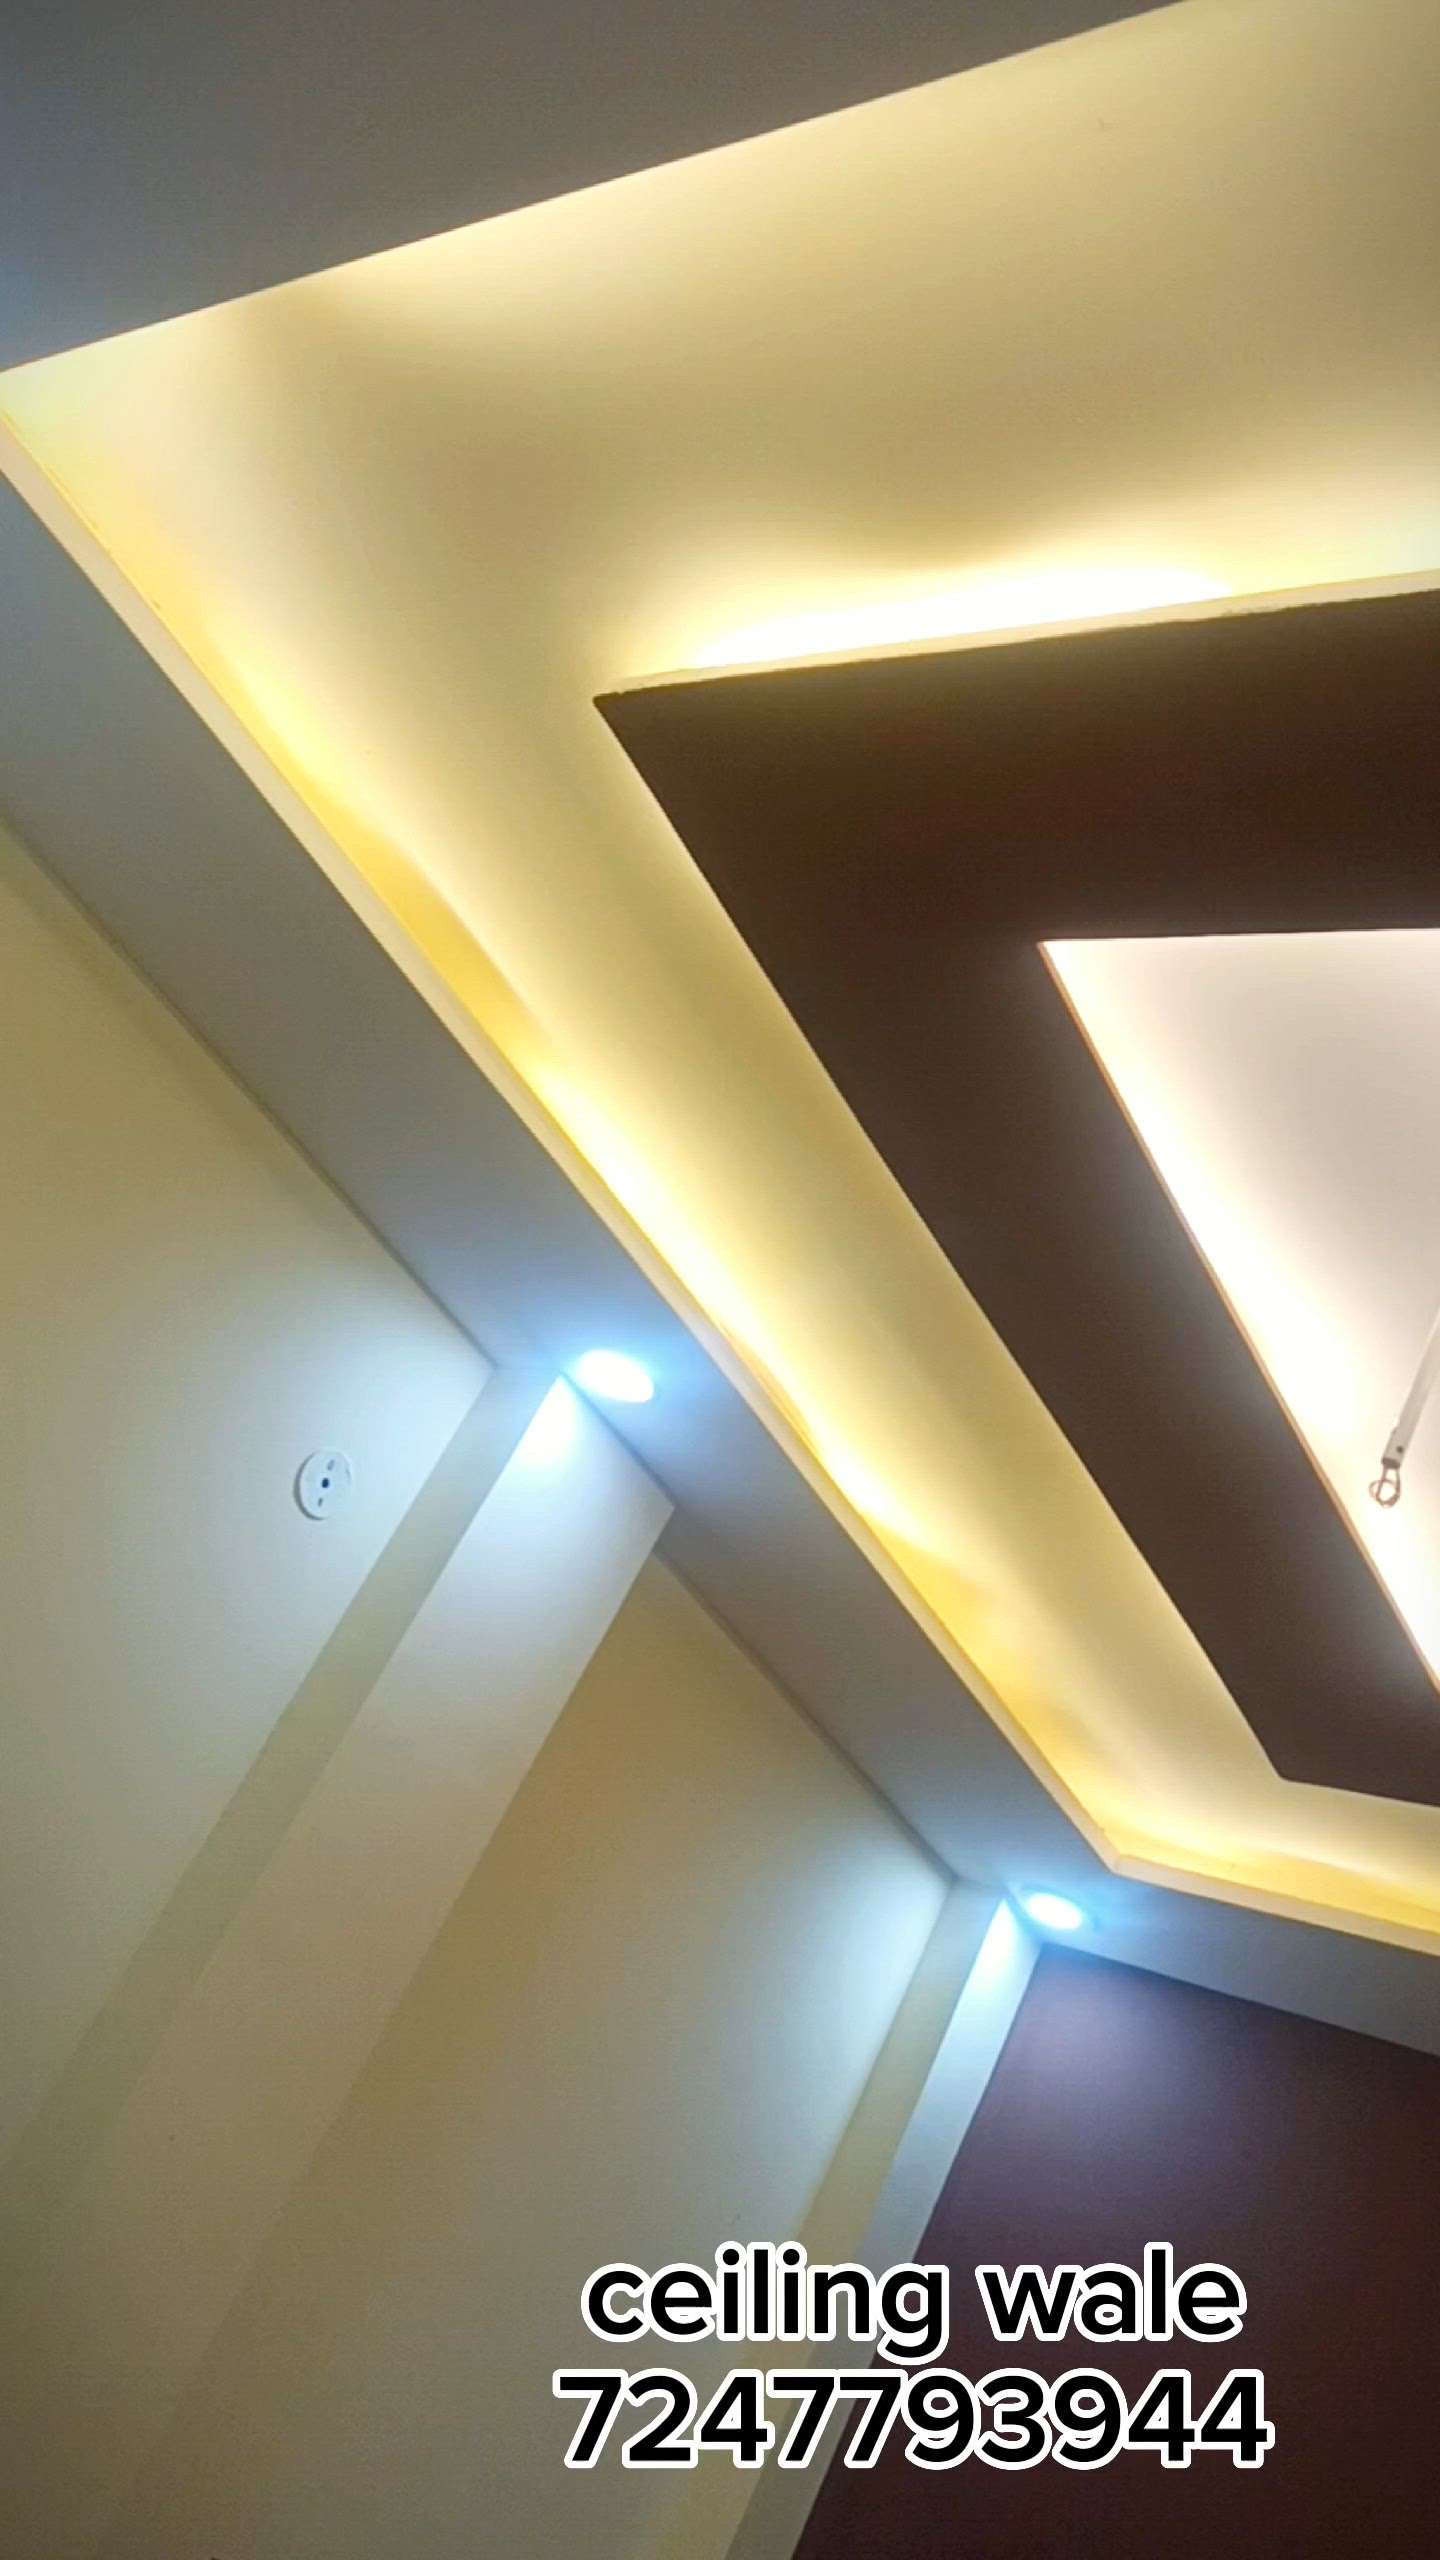 #popceiling & #PVCFalseCeiling 
best quality work provided